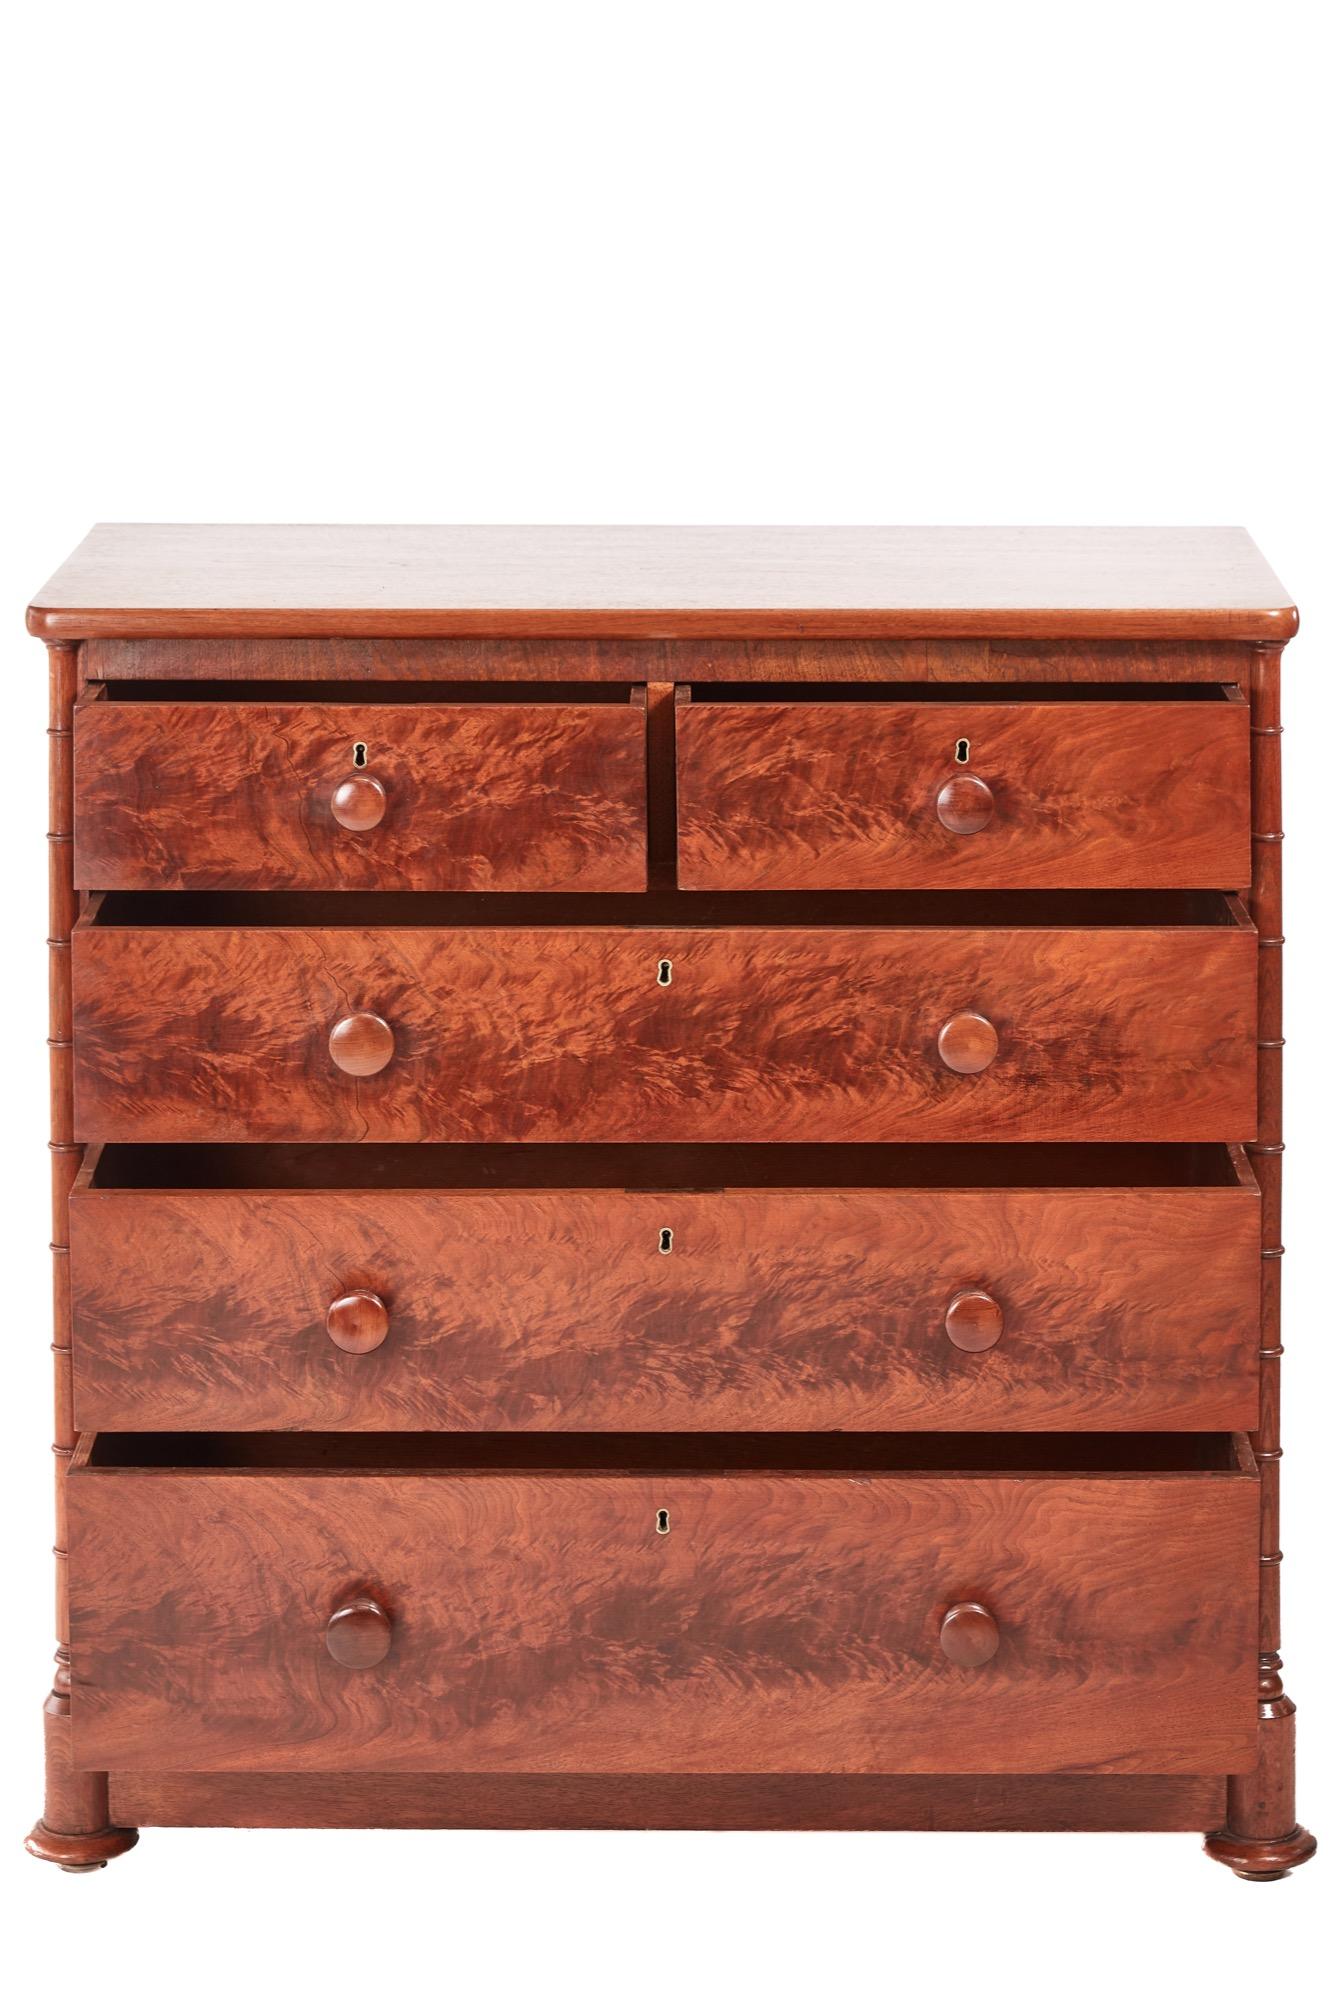 Unusual and outstanding 19th century Victorian antique walnut chest of drawers with an attractive walnut top, it boasts 2 short and 3 long drawers all with original turned knobs, Unusual elegant turned columns to the side supported by a plinth base